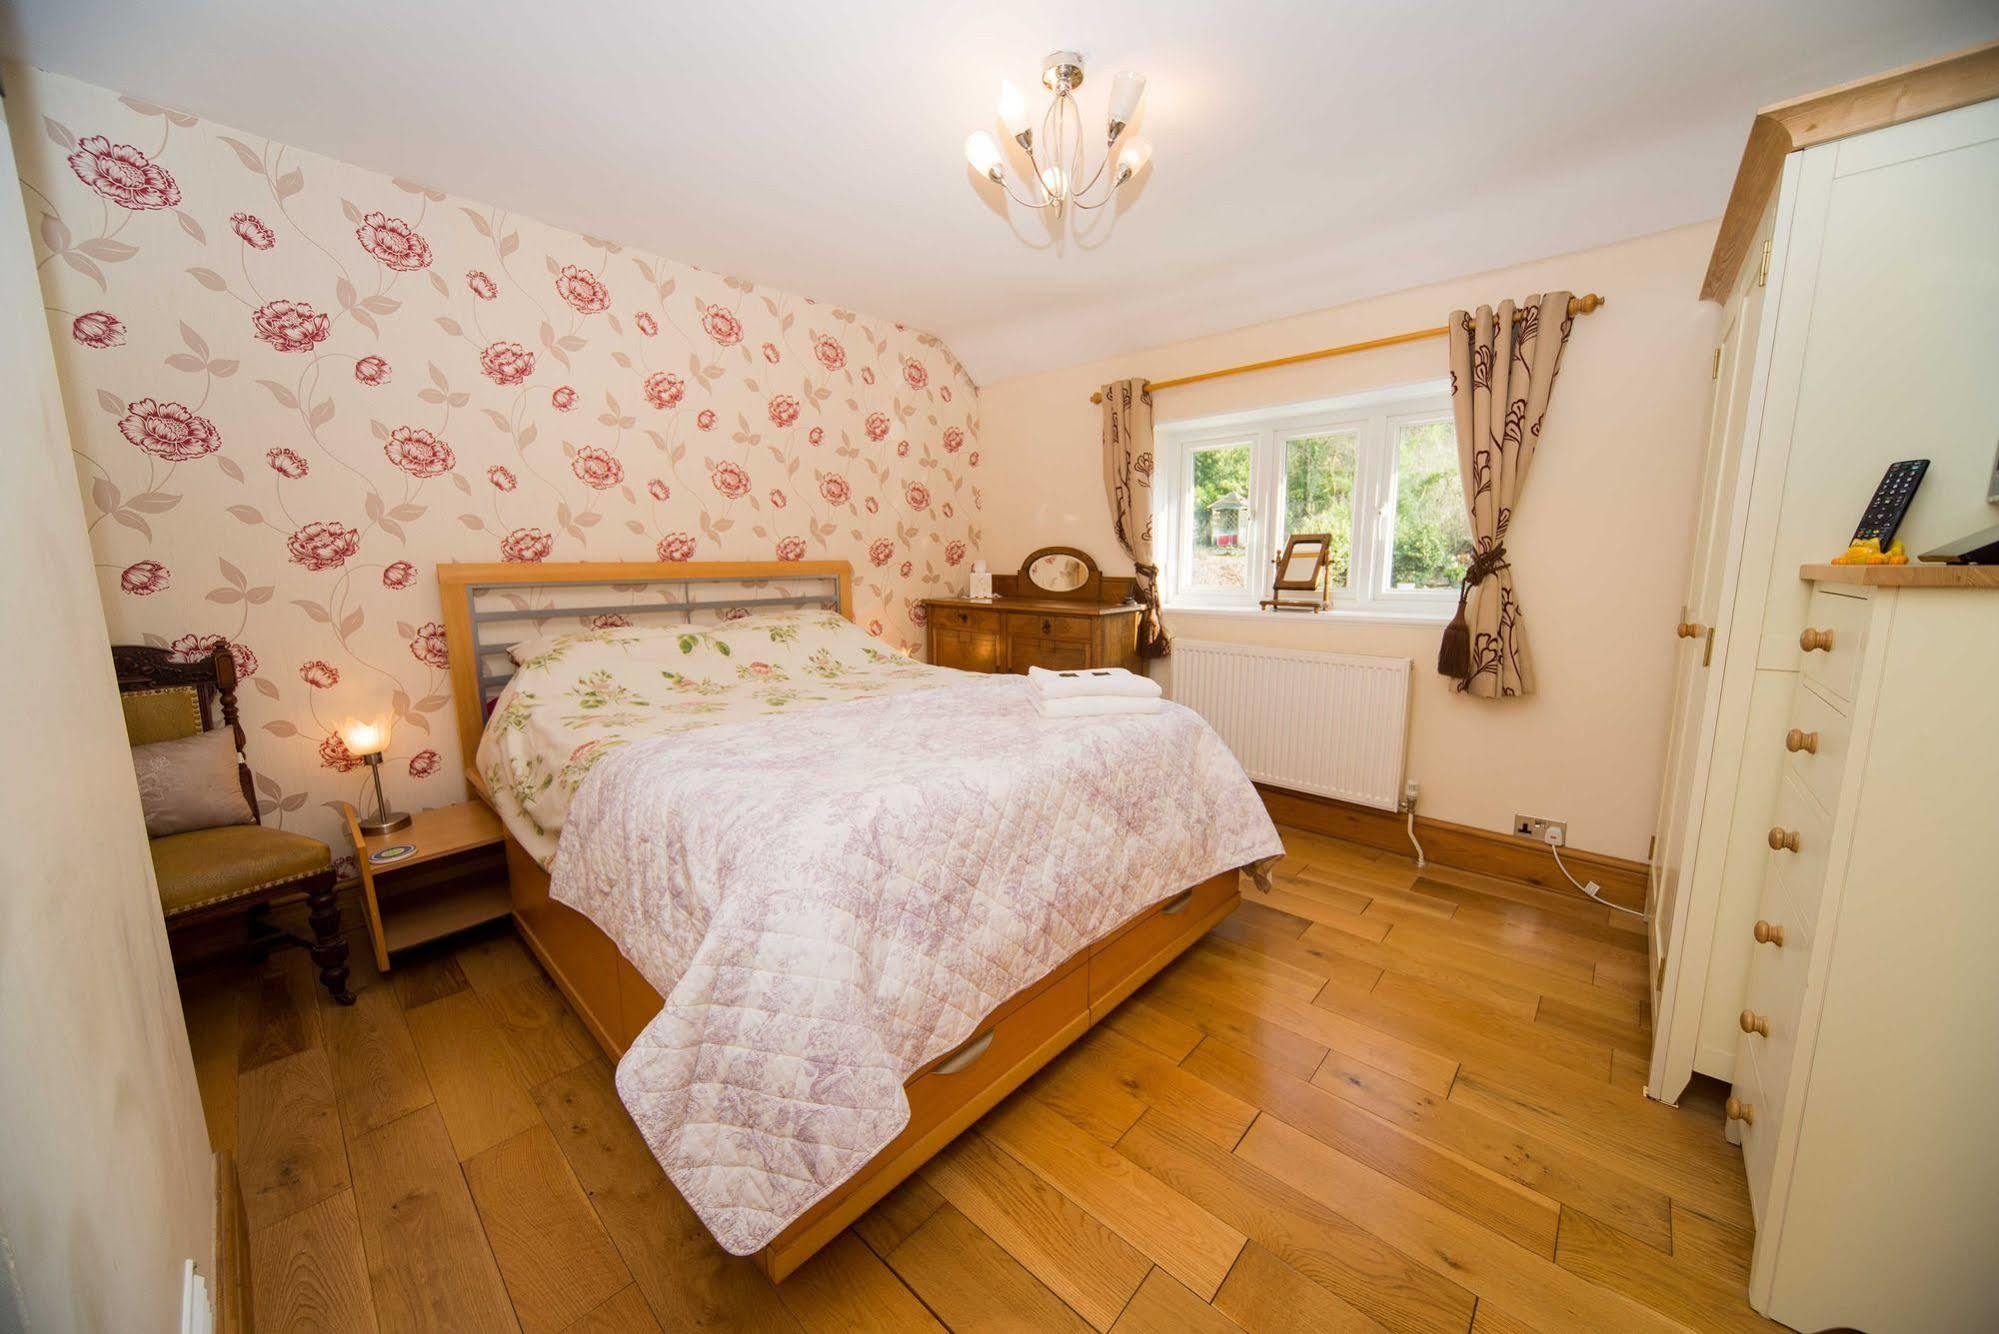 Cosy Snug With Shower Ensuite - It Has Beautiful Countryside Views - Only 3 Miles From Lyme Regis, Charmouth And River Cottage - It Has A Private Balcony And A Real Open Fireplace - Comes With Free Private Parking Axminster Zewnętrze zdjęcie